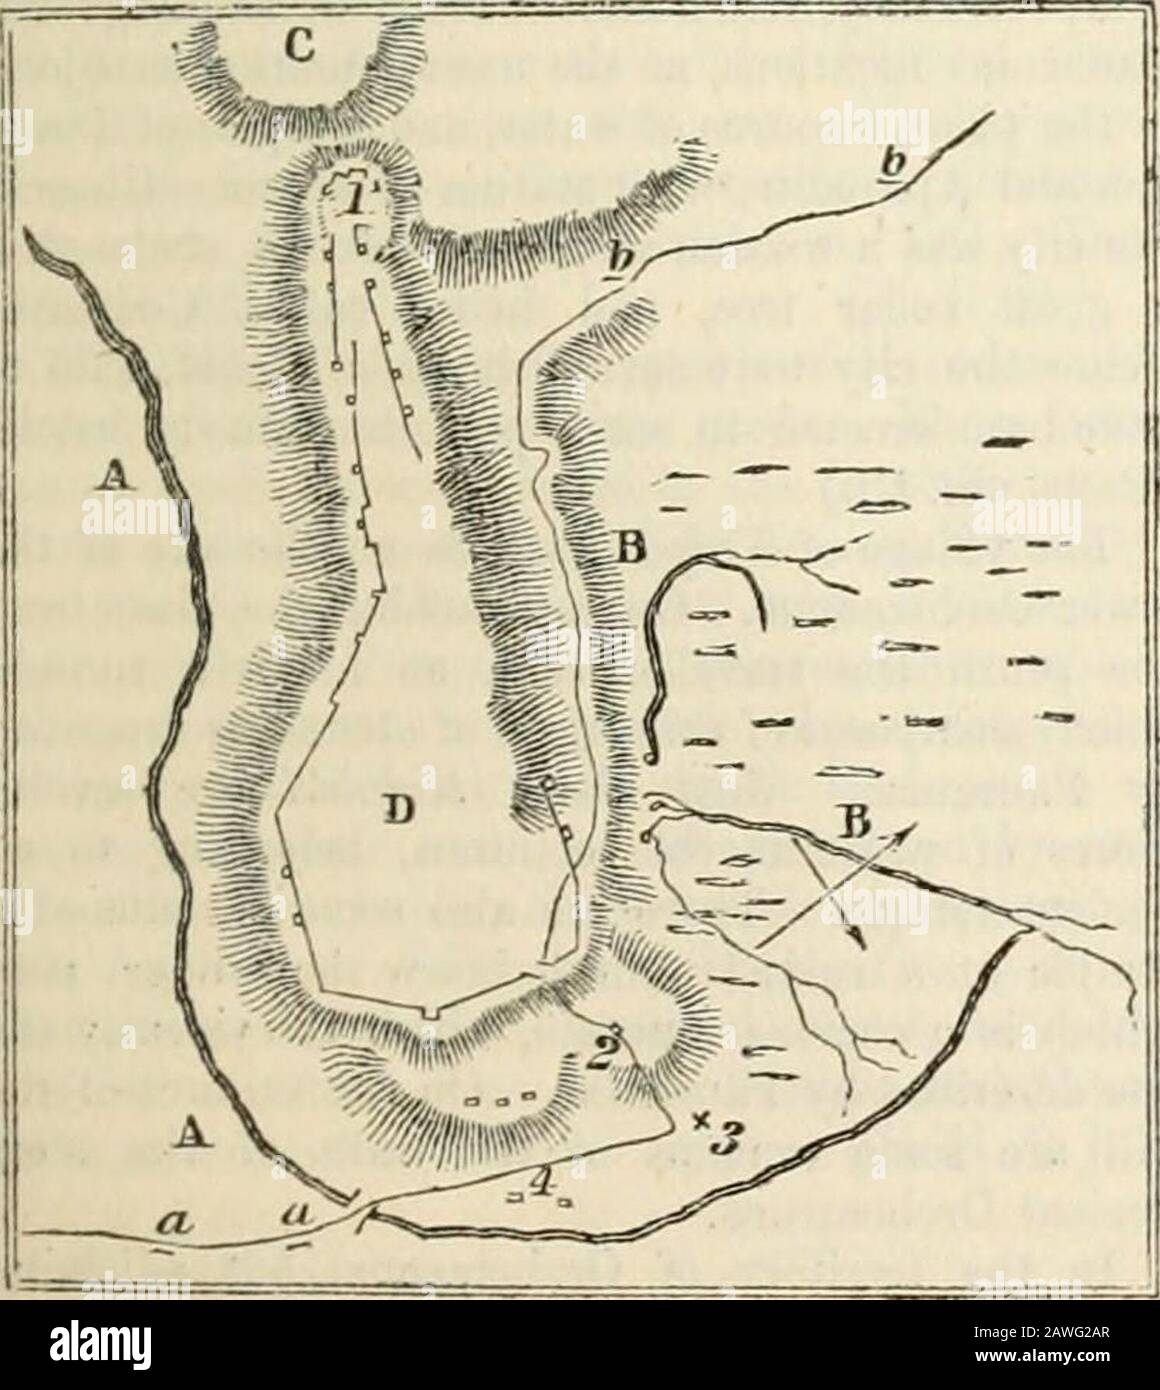 Dictionary of Greek and Roman geography . he former belongs to the earlier Orclio-menus, the latter to the later city, and dates from thetime of its restoration either by Philip or the Pho-cians. • Towards the middle of the northern side thehill of Orchomenus is most precipitous, and here thewalls are not traceable. The circumference of thewhole was about 2 miles. The citadel occupies arock about 40 yards in diameter, and seems to havebeen an irregular hexagon; but three sides only re-inain, no foundations being visible on the easternhalf of the rock. At the northern angle are theruins of a to Stock Photo